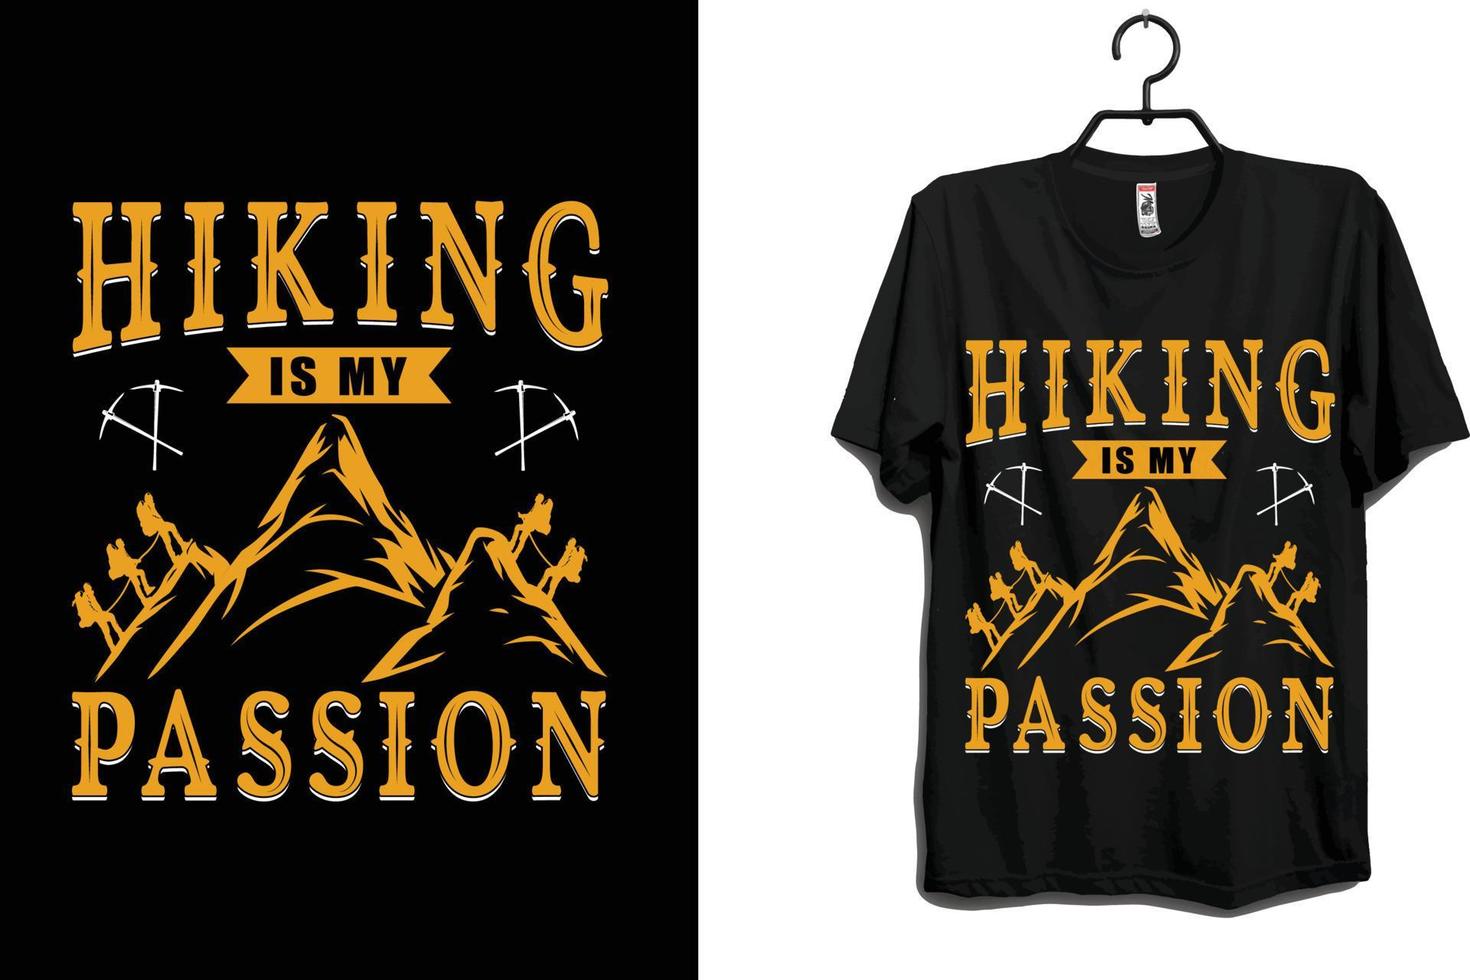 hiking is ,y passion t shirt design vector